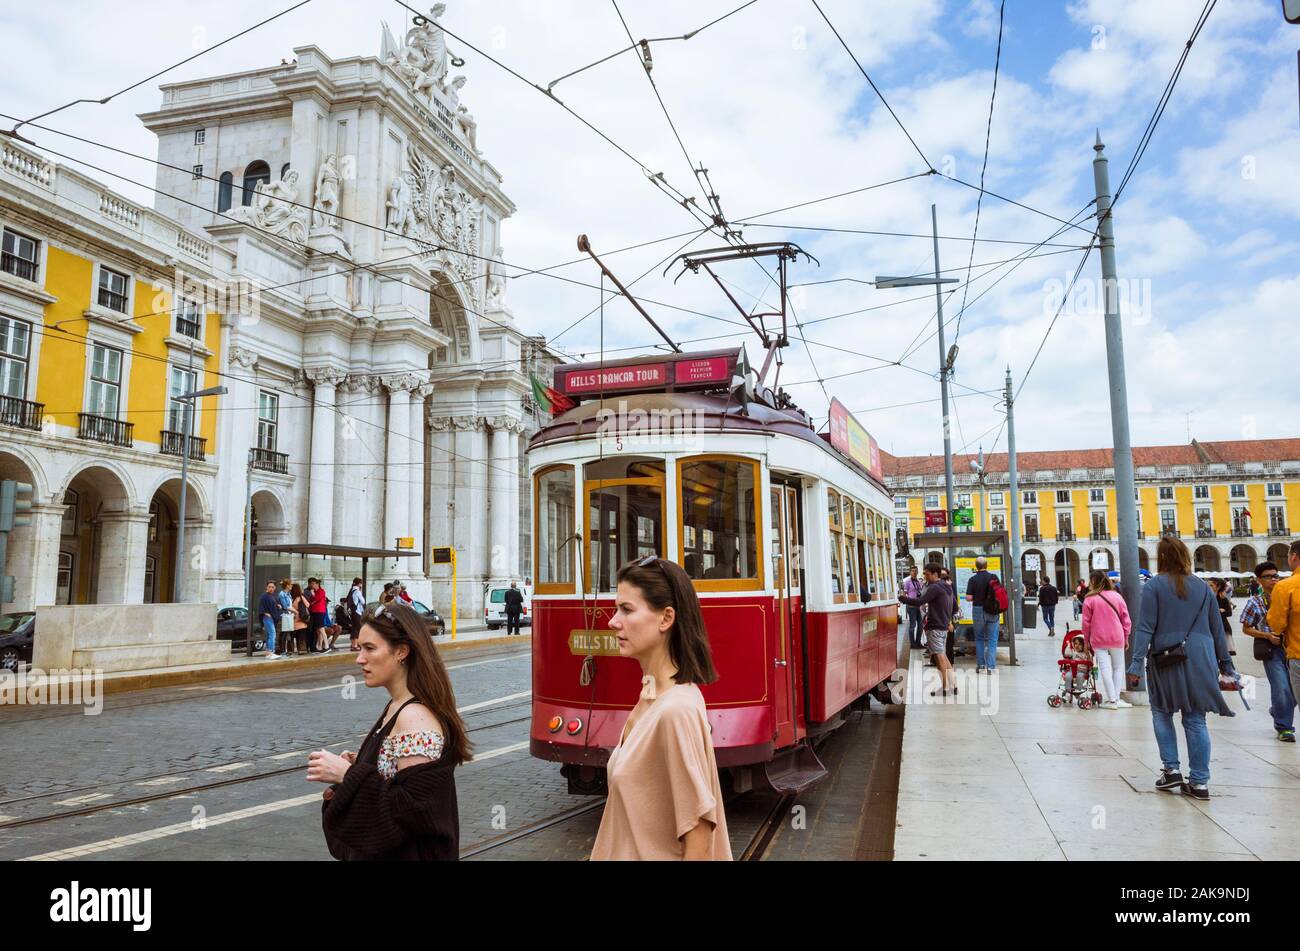 Lisbon, Portugal : Two young women walk past an old red tram next to the Rua Augusta Triumphal  Arch at Praça do Comércio square. Stock Photo